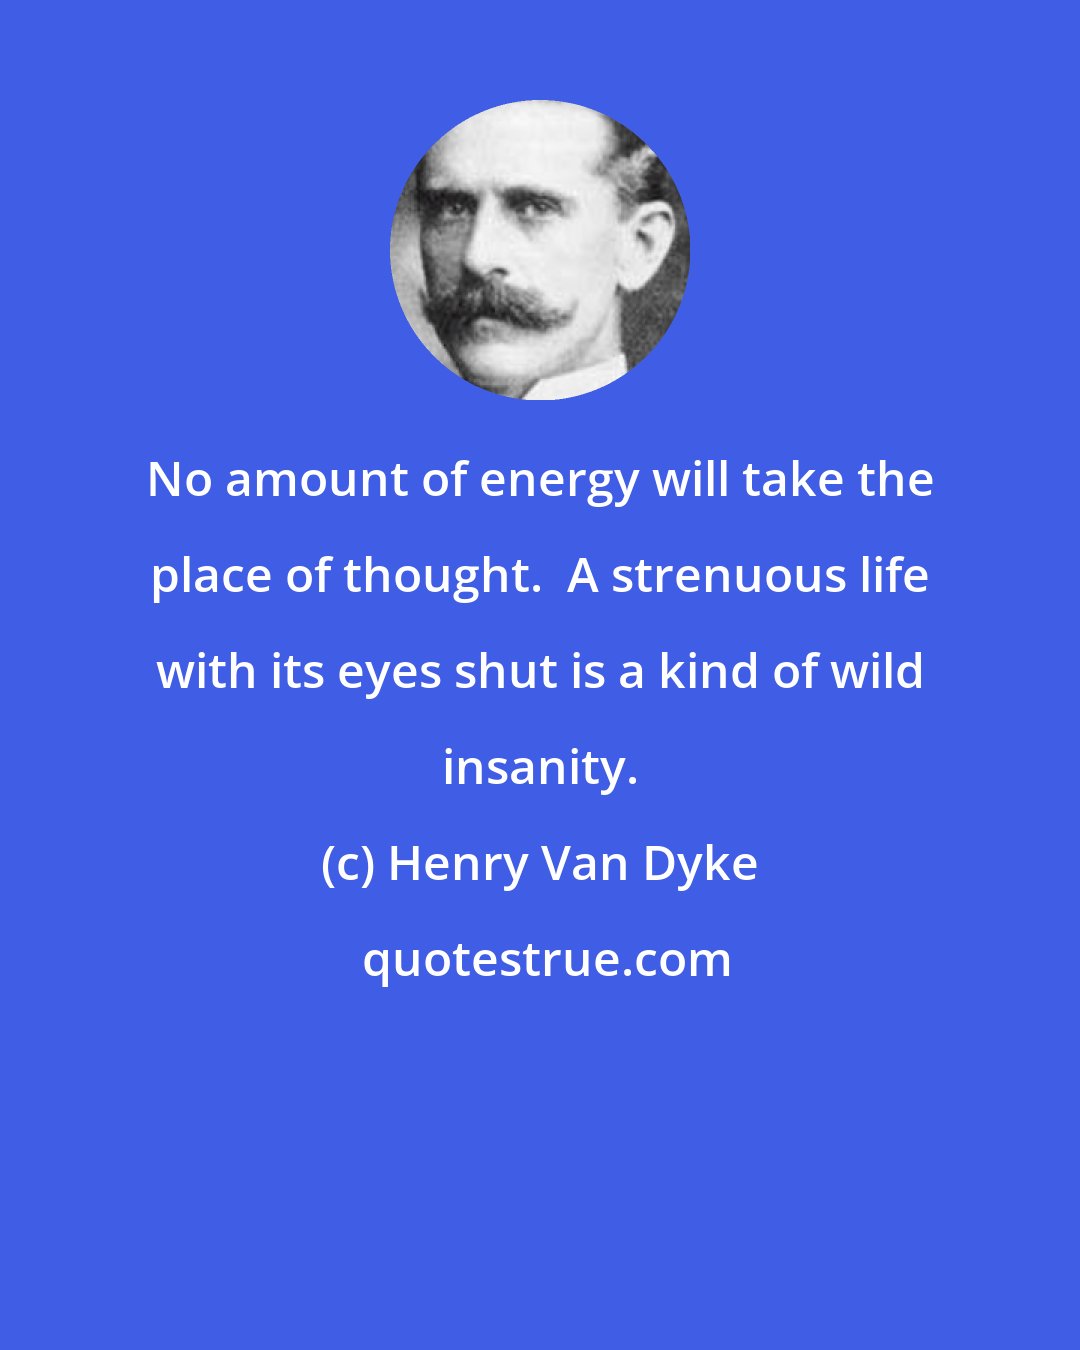 Henry Van Dyke: No amount of energy will take the place of thought.  A strenuous life with its eyes shut is a kind of wild insanity.